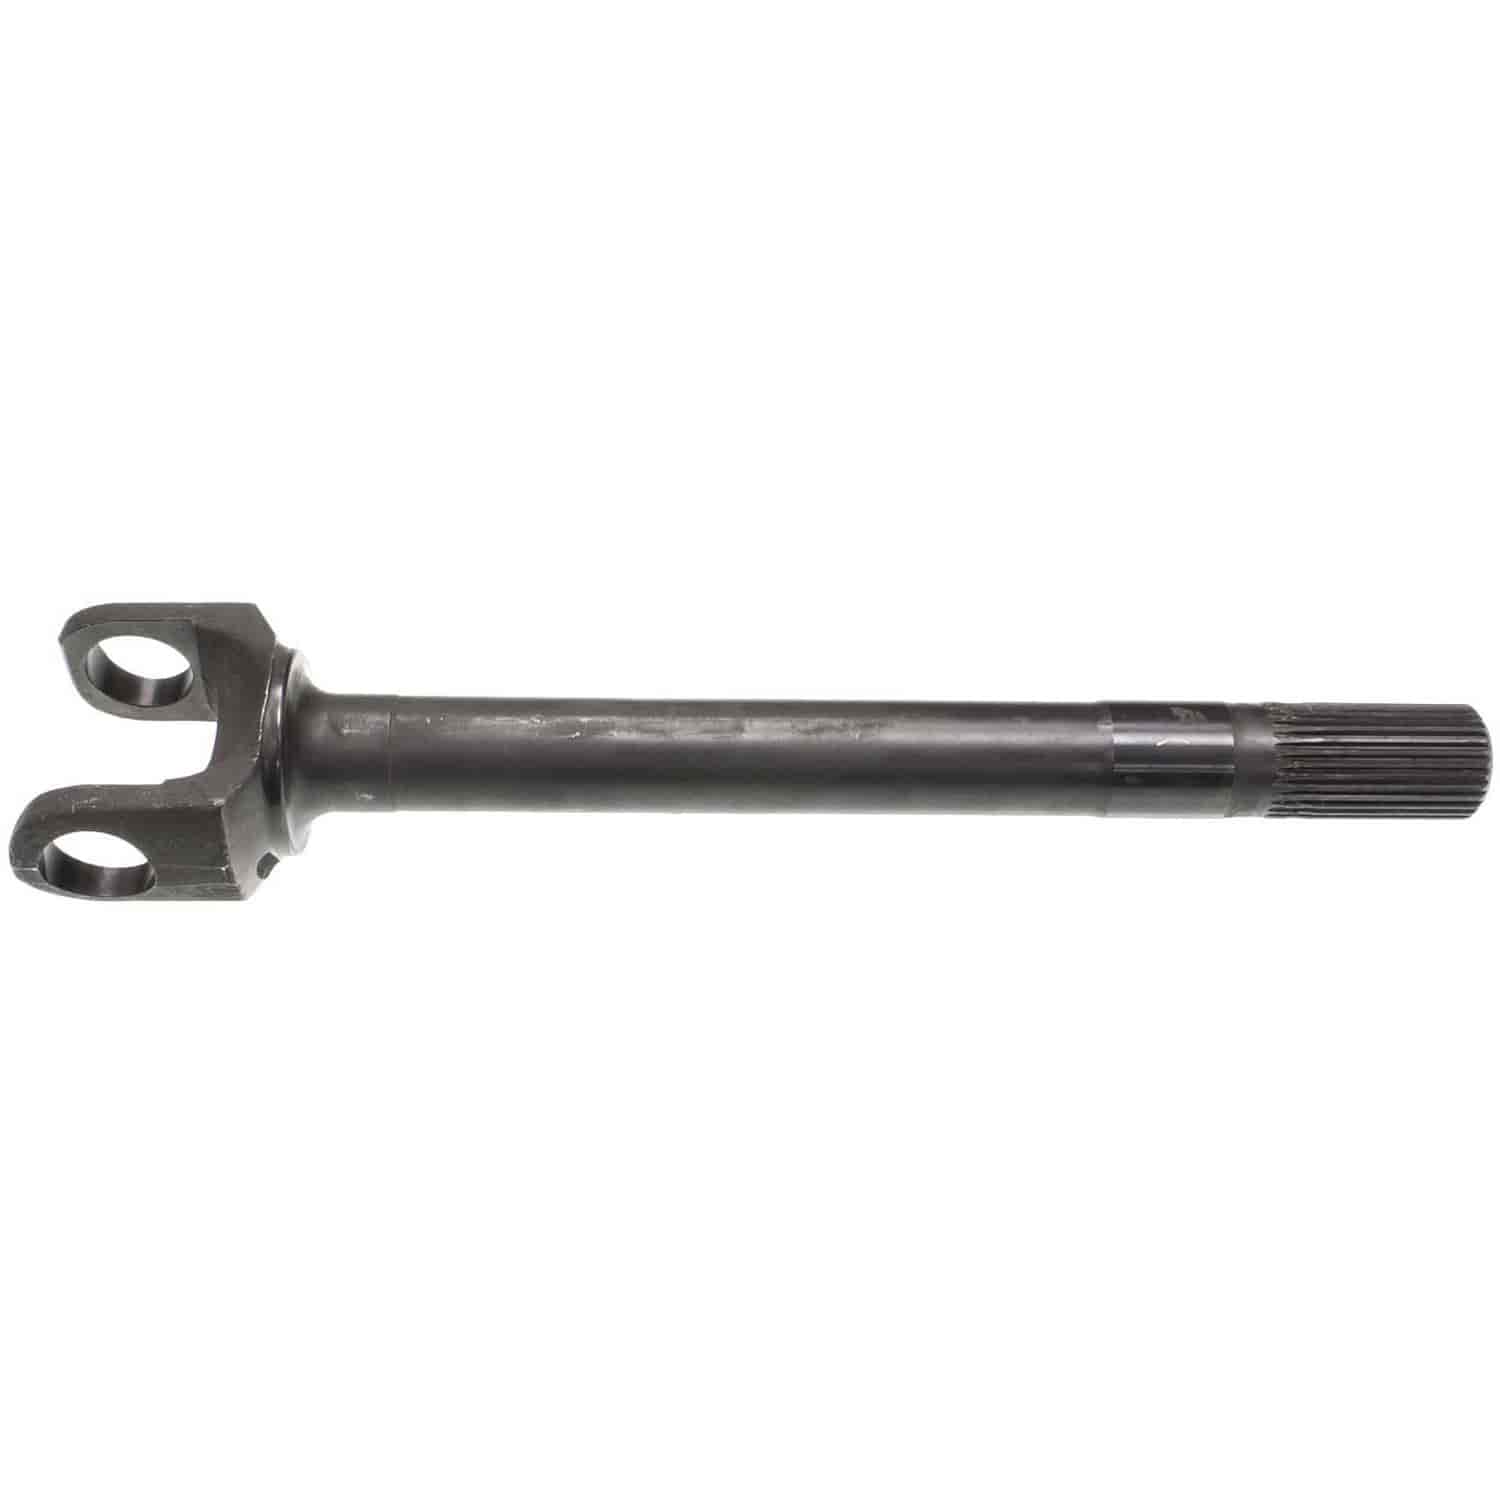 Axle Shaft 14.78 in. Overall Length 30 Spline Black Oxide Badged Under The Ten Factory Product Line